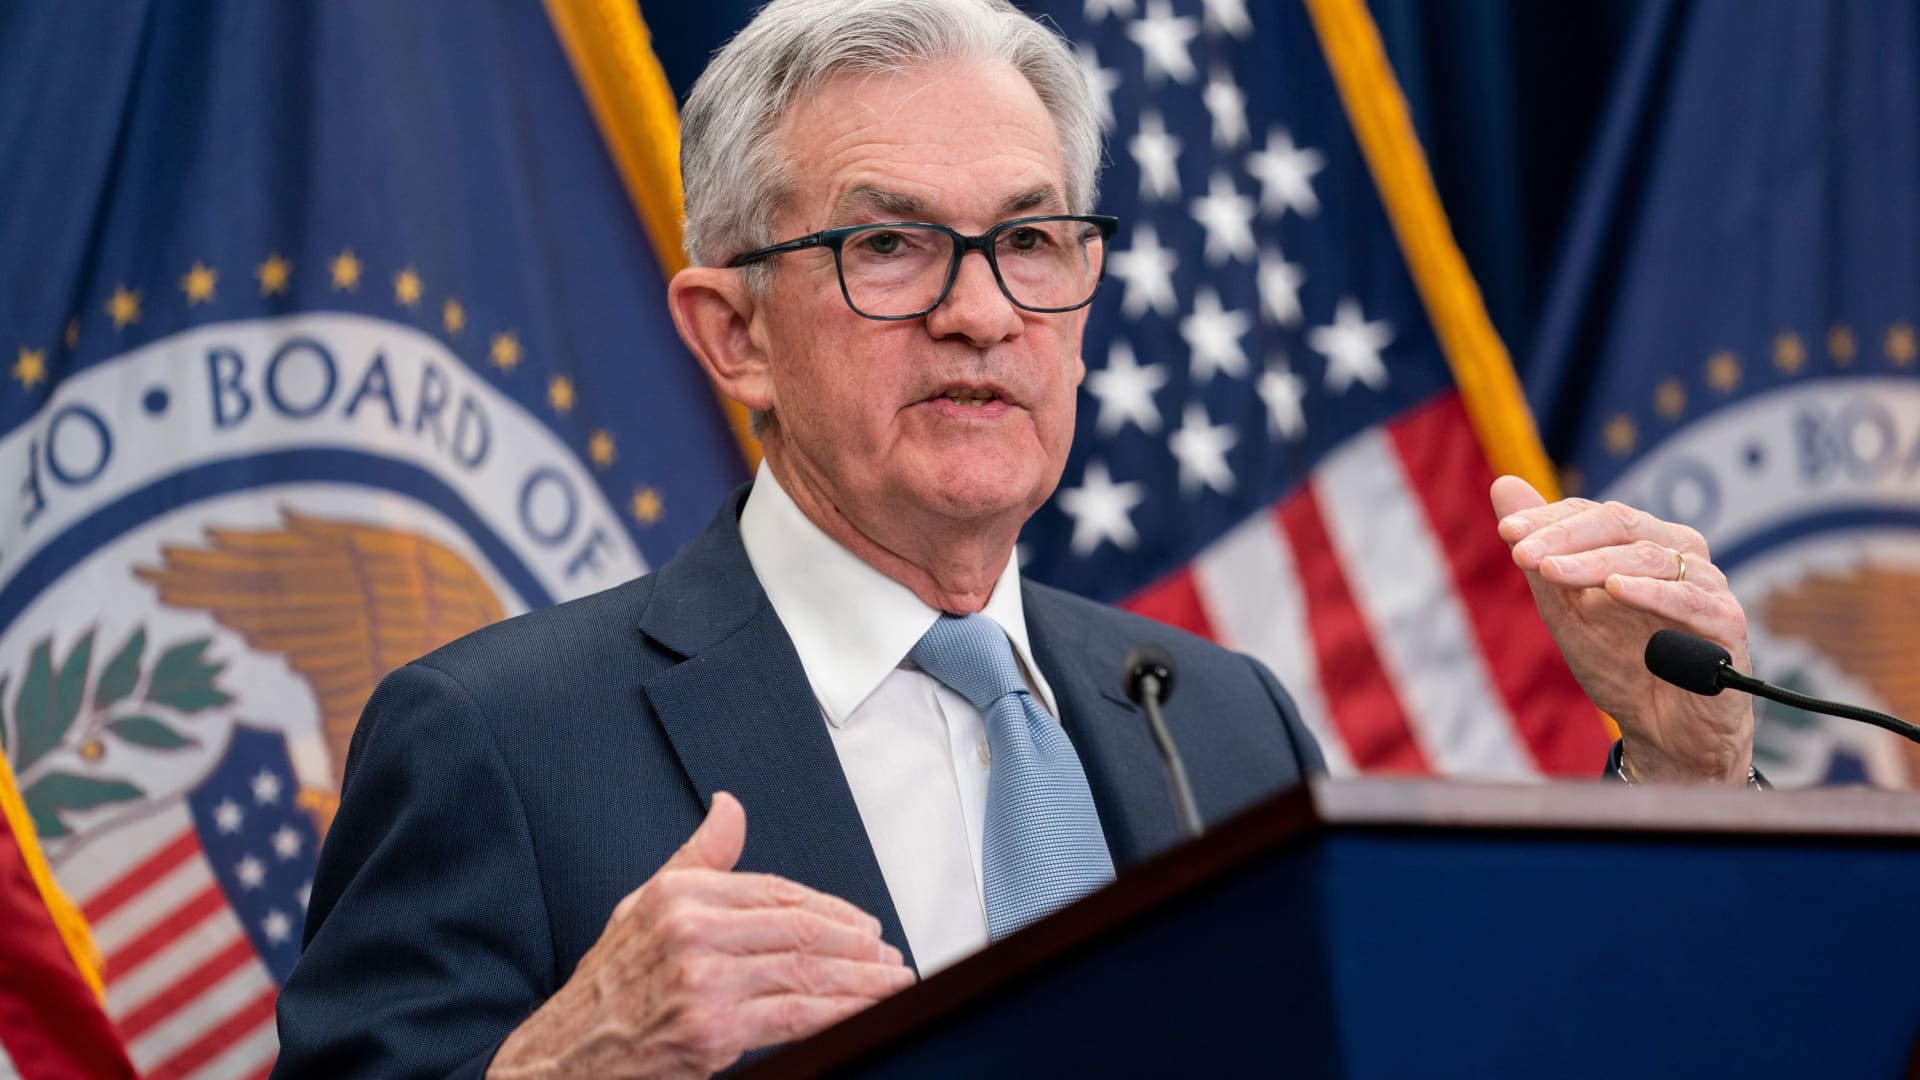 Powell stresses need for Fed political independence on tackling inflation